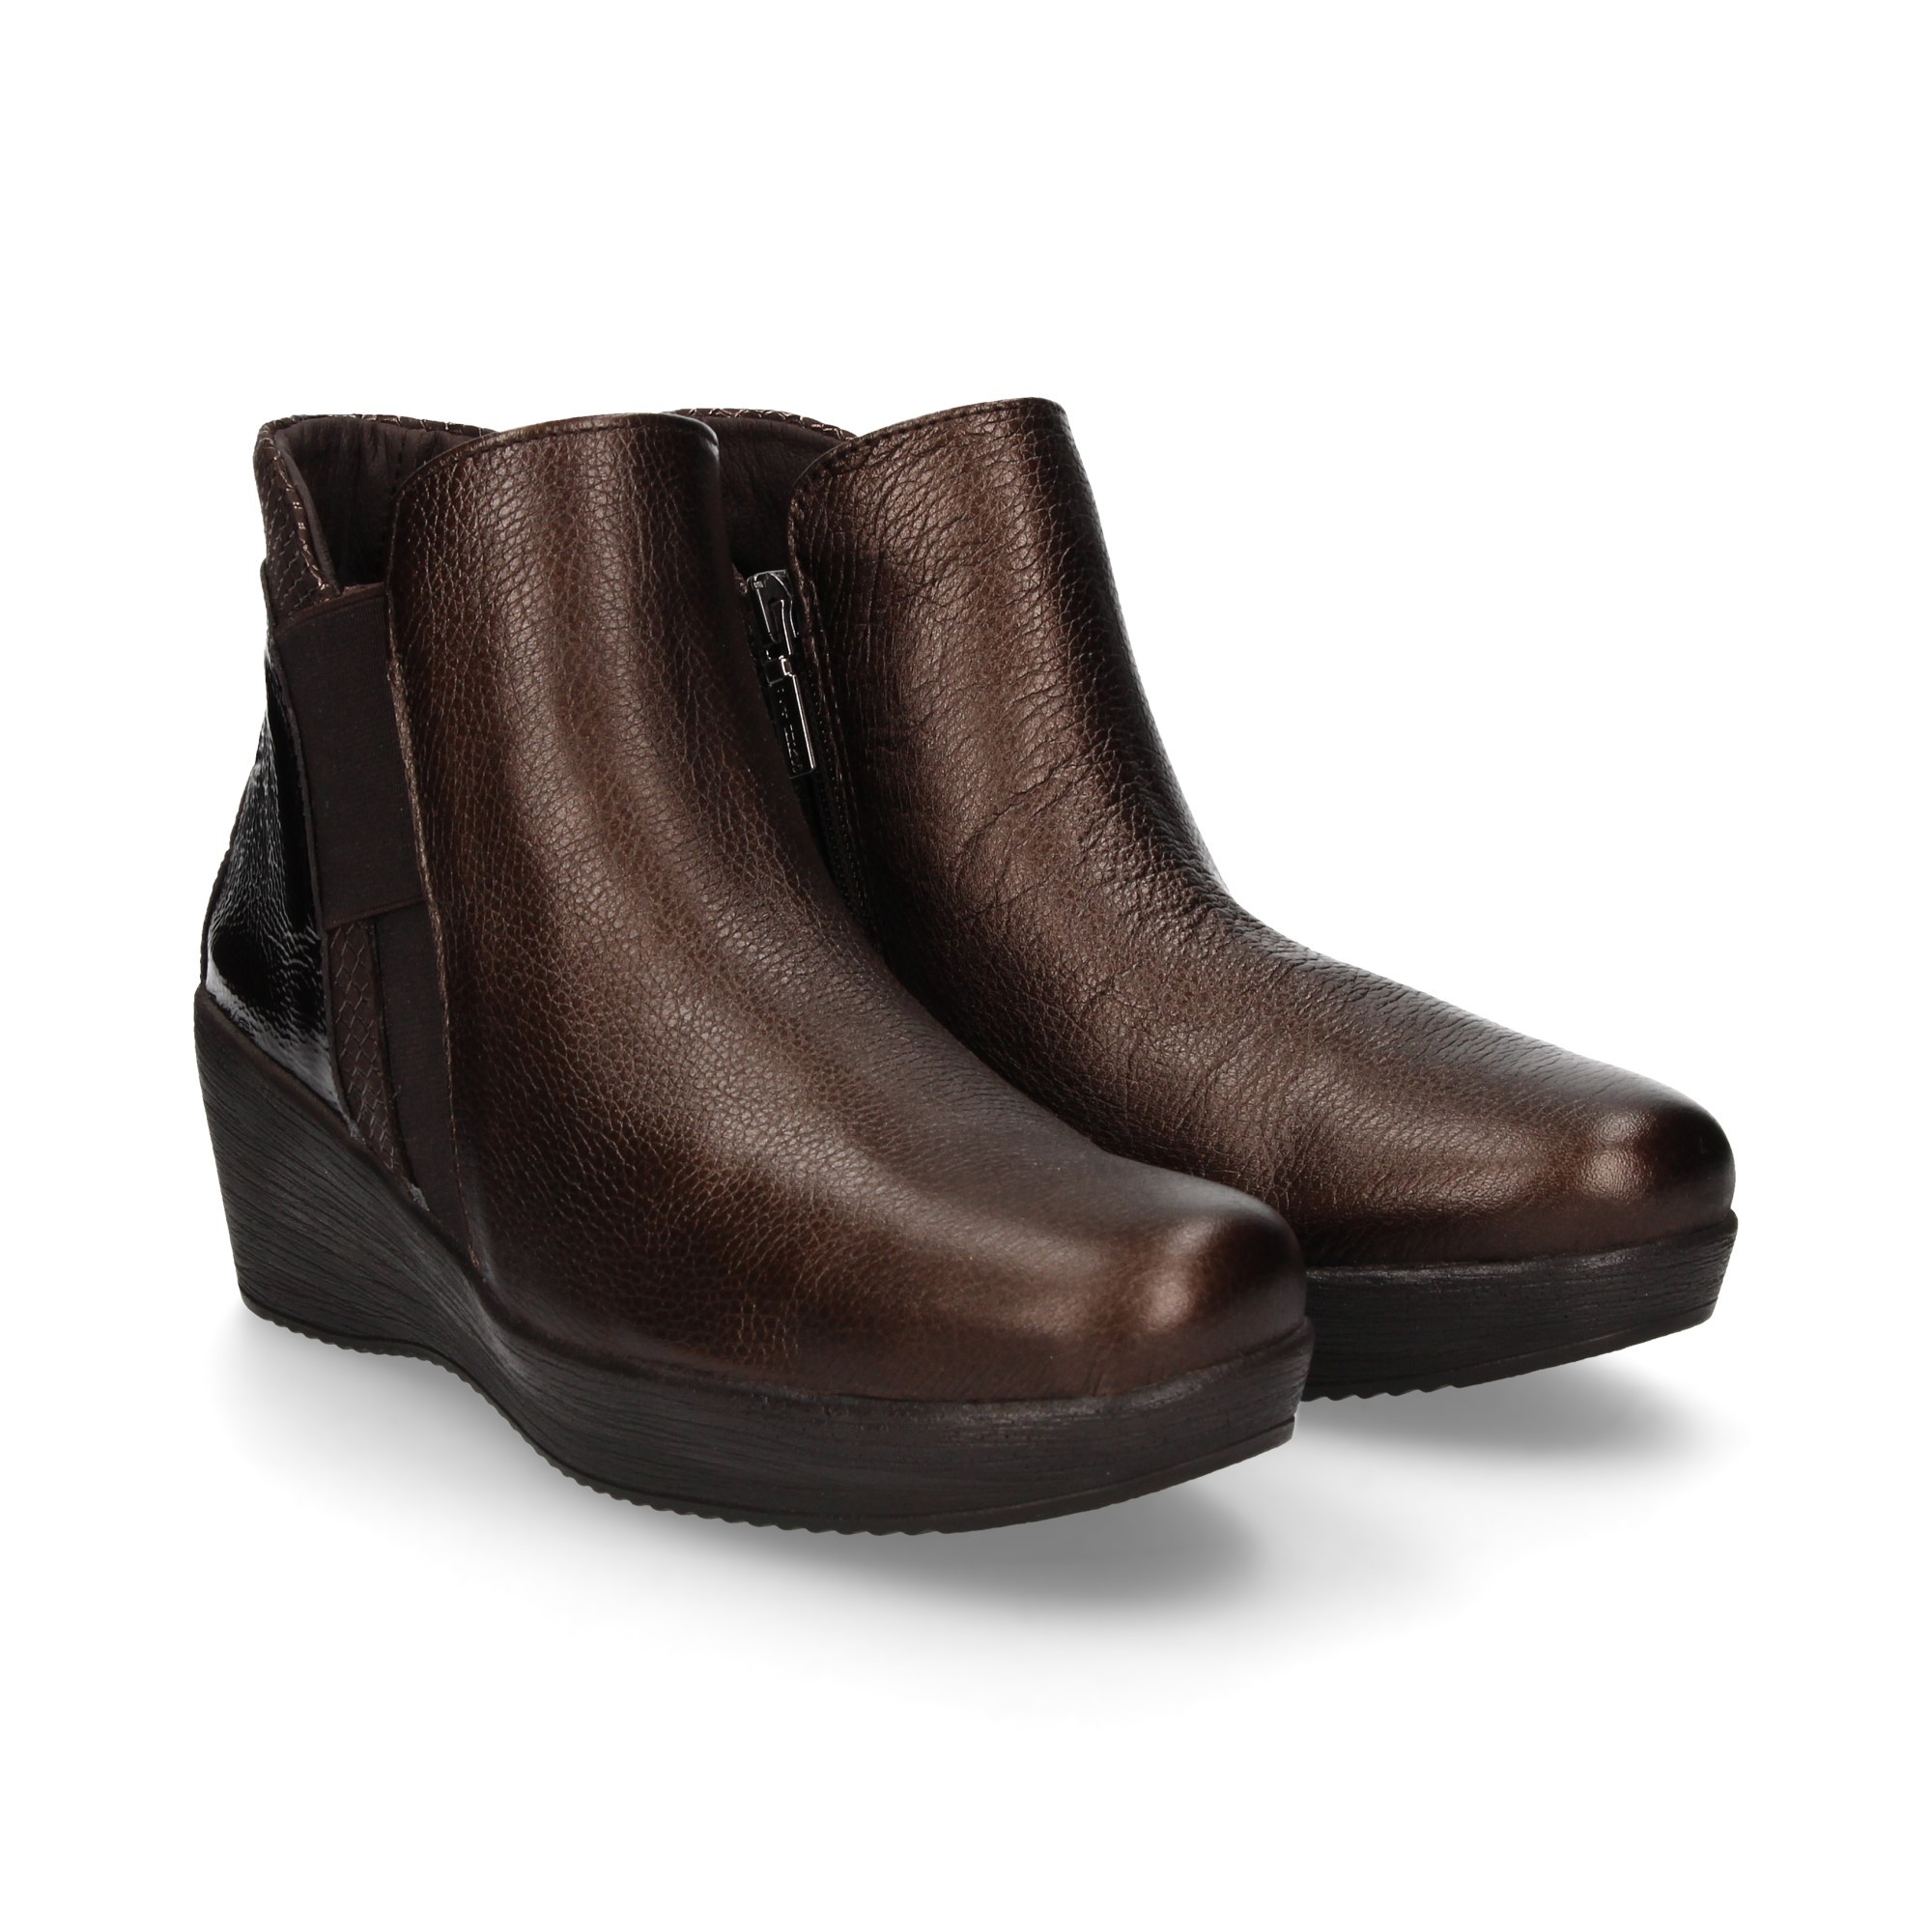 elastic-patent-leather-brown-leather-wedge-boot